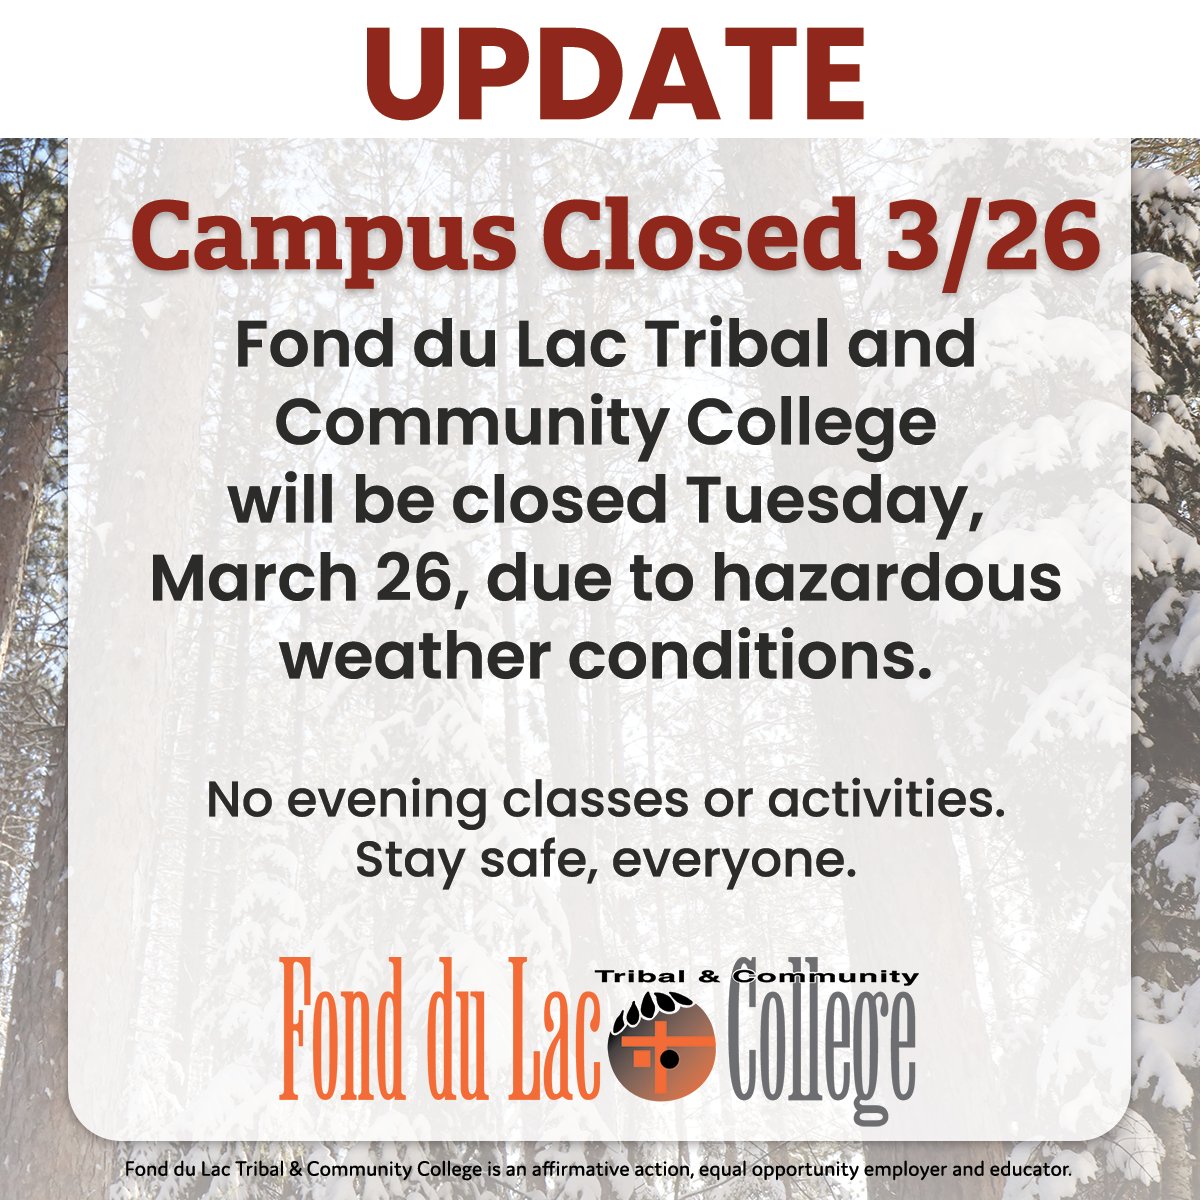 Update! FDLTCC is closed Tuesday, March 26, due to hazardous weather conditions. No evening classes or activities. Stay safe, everyone.